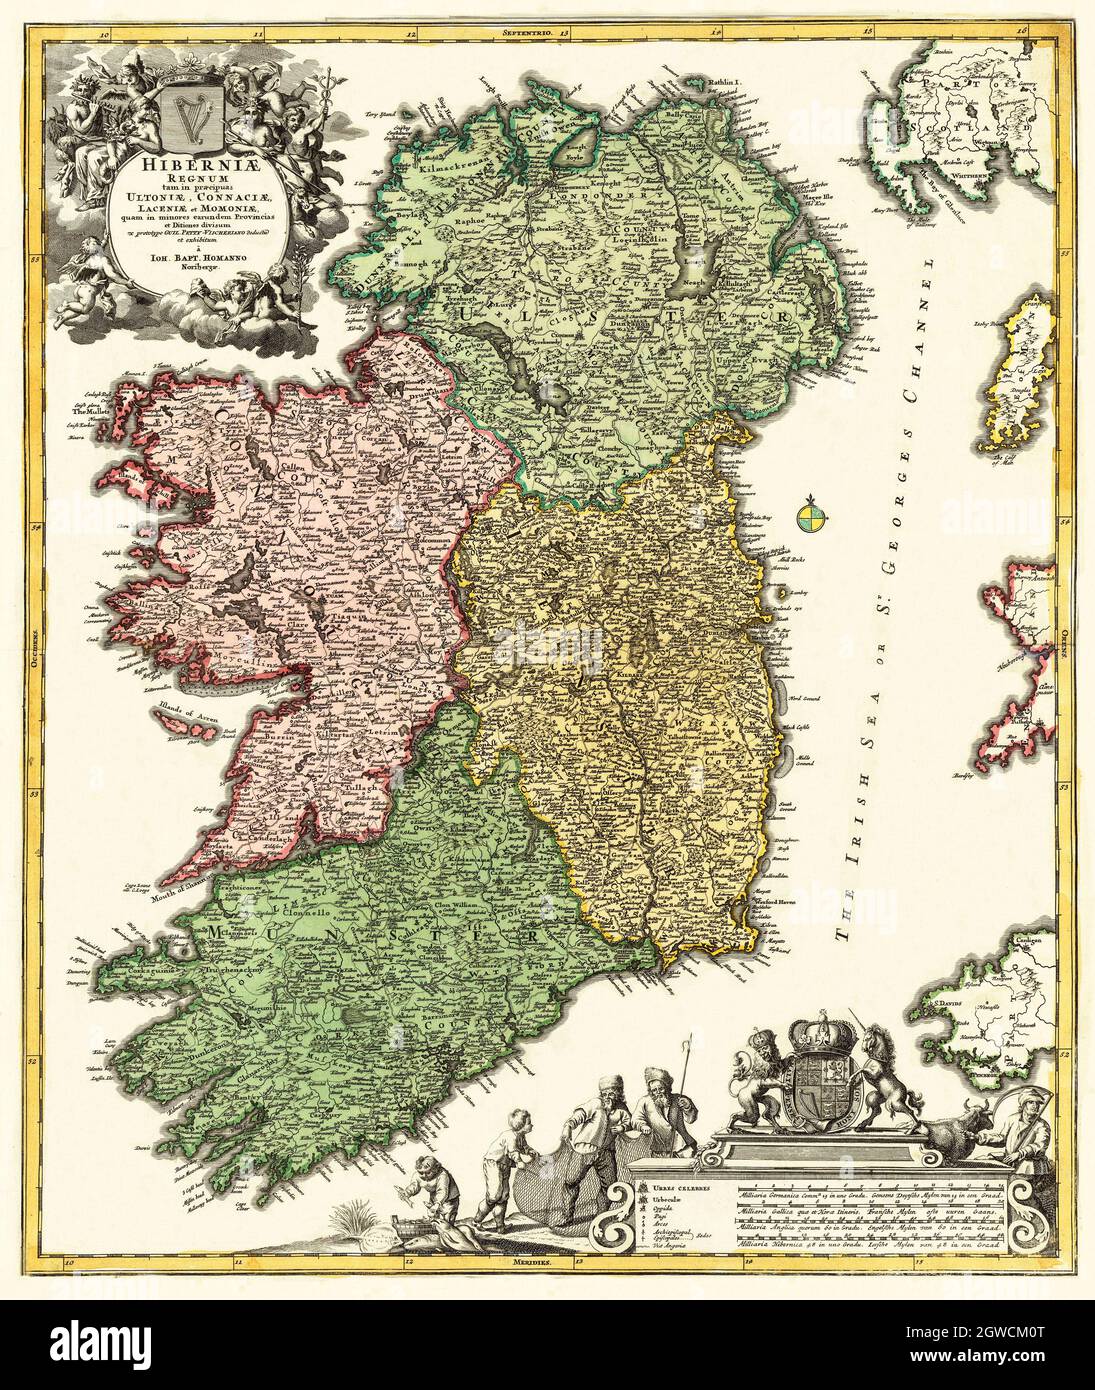 'Hiberniæ Regnum Tam in præcipuas Ultoniæ, Connaciæ, Laceniæ et Momoniæ, Quam in Minores Earundem Provincias et Ditiones Divisum'. Translation: The Kingdom of Ireland, Divided as Much into the Main Regions of Ulster, Connacht, Leinster and Munster. This hand-colored map of Ireland, based on earlier works, was published in 1715 by the firm of Nuremberg engraver and publisher Johann Baptist Homann (1663--1724). The map is in Latin, but place-names are in English and the original Celtic renderings into English. Stock Photo